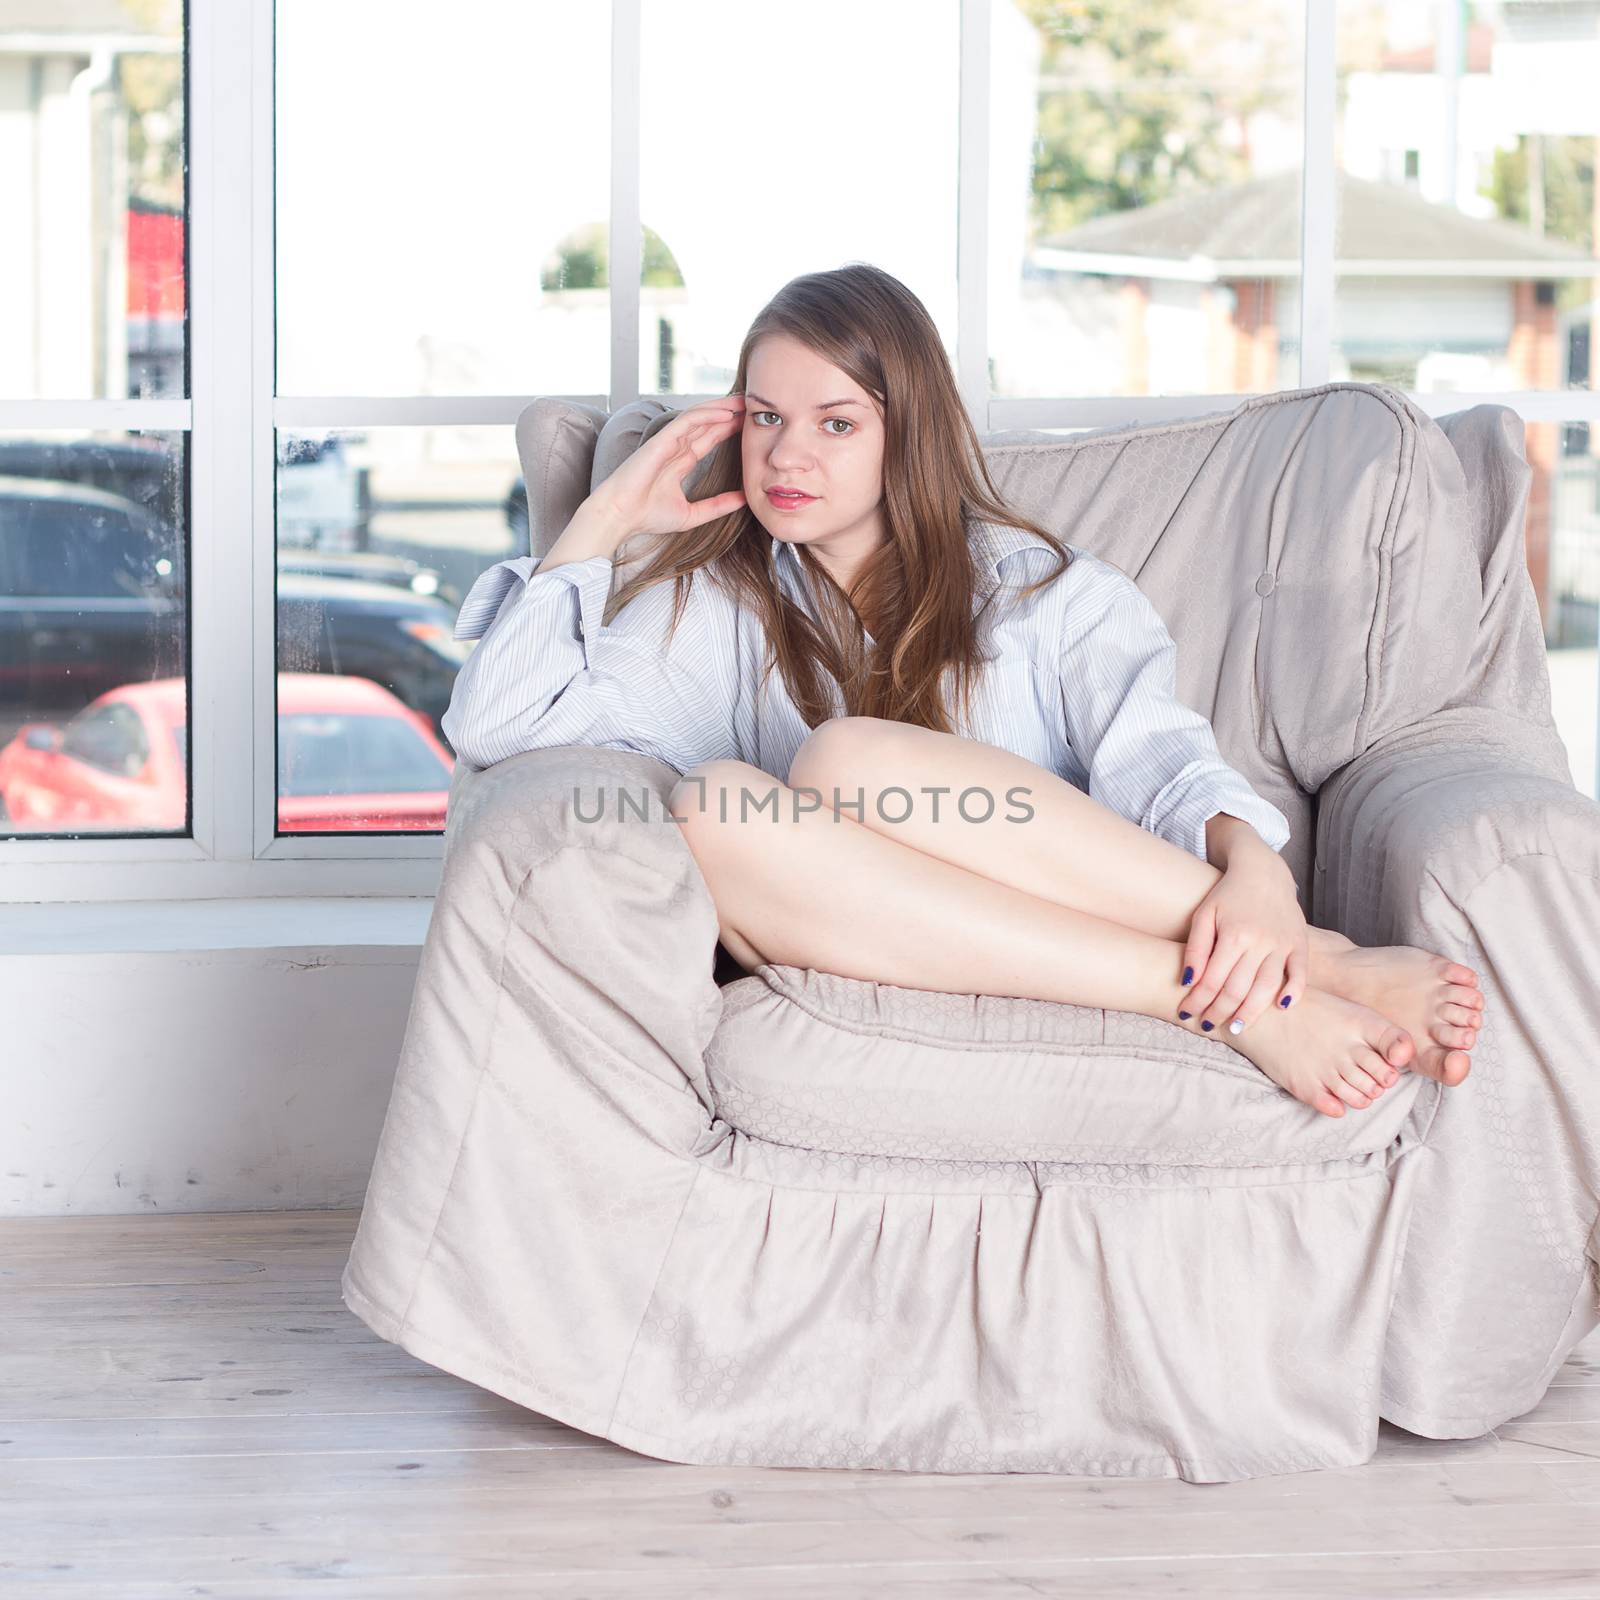 Young woman at home sitting on modern chair in front of window relaxing in her living room